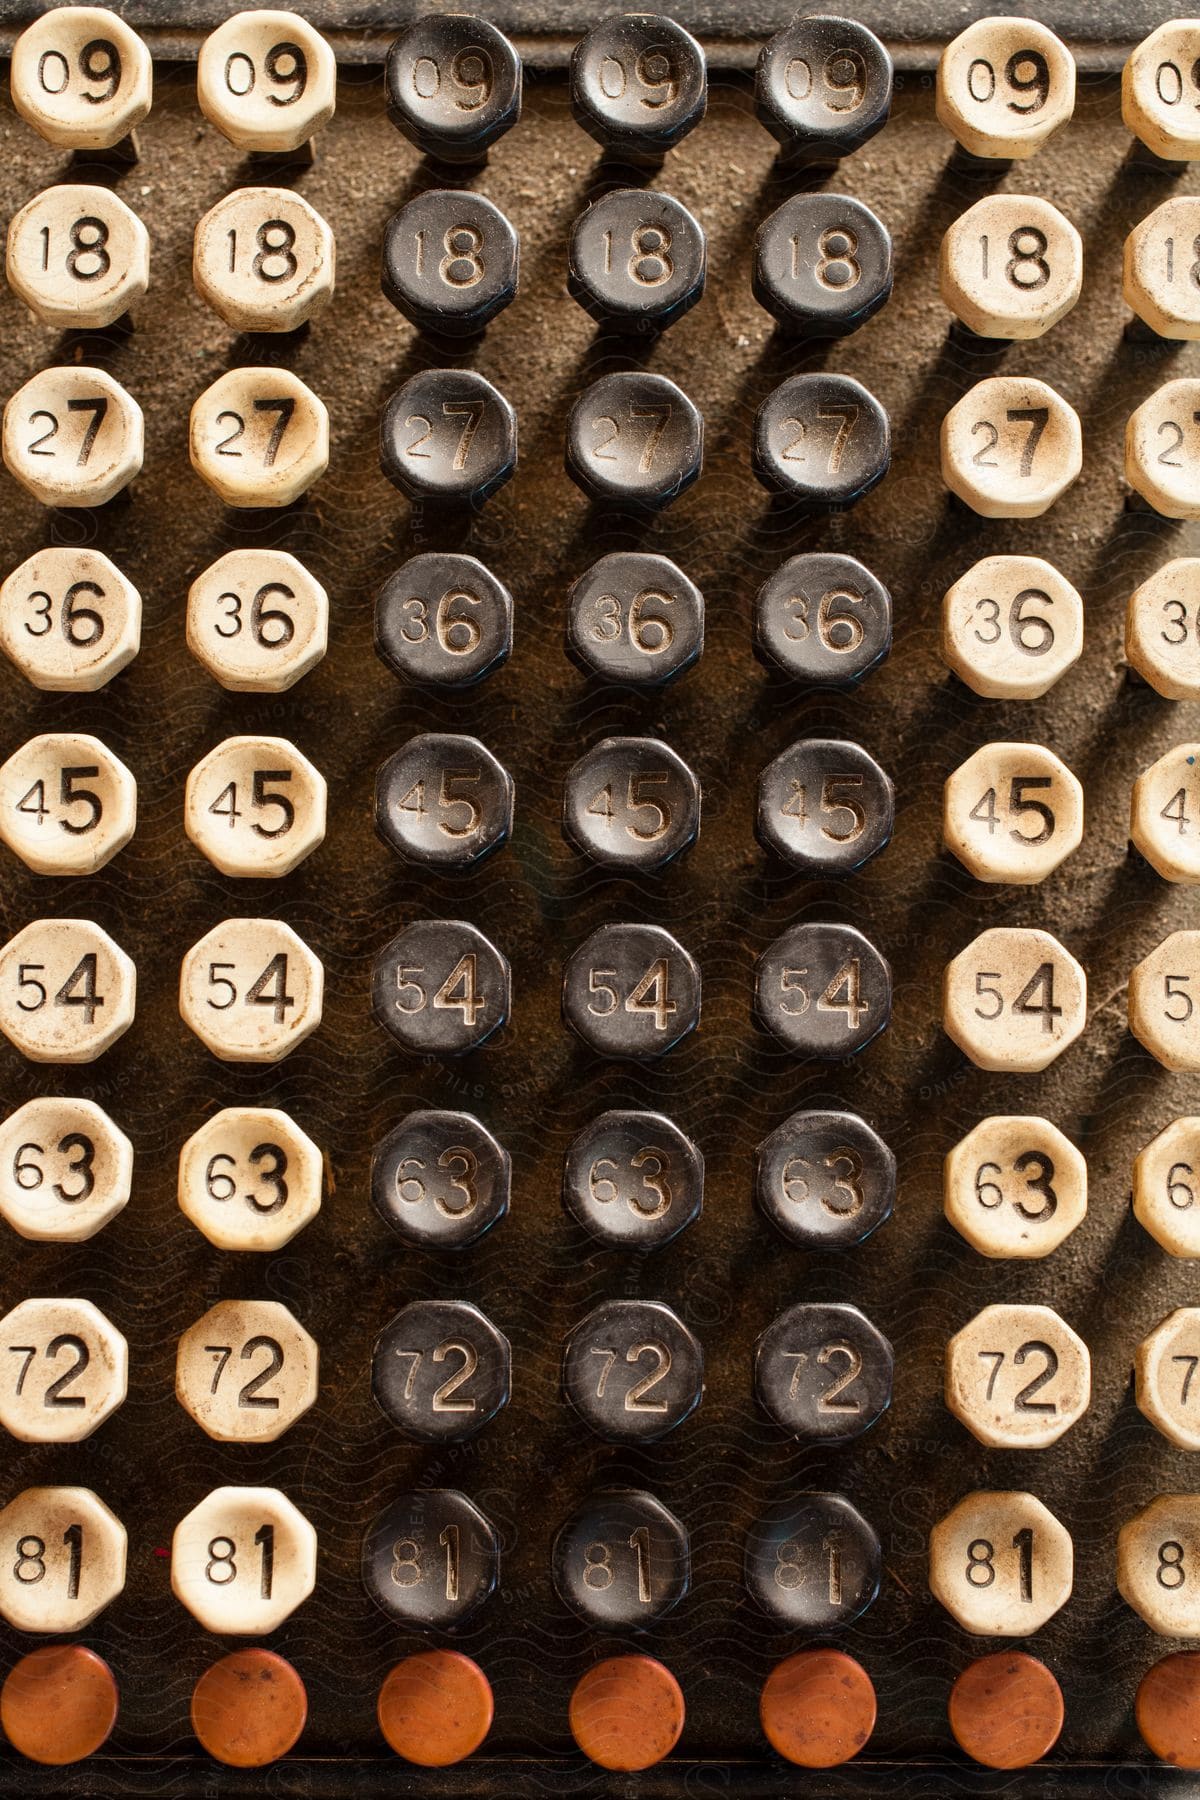 An array of old and numbered buttons that repeat sideways and grow across rows.